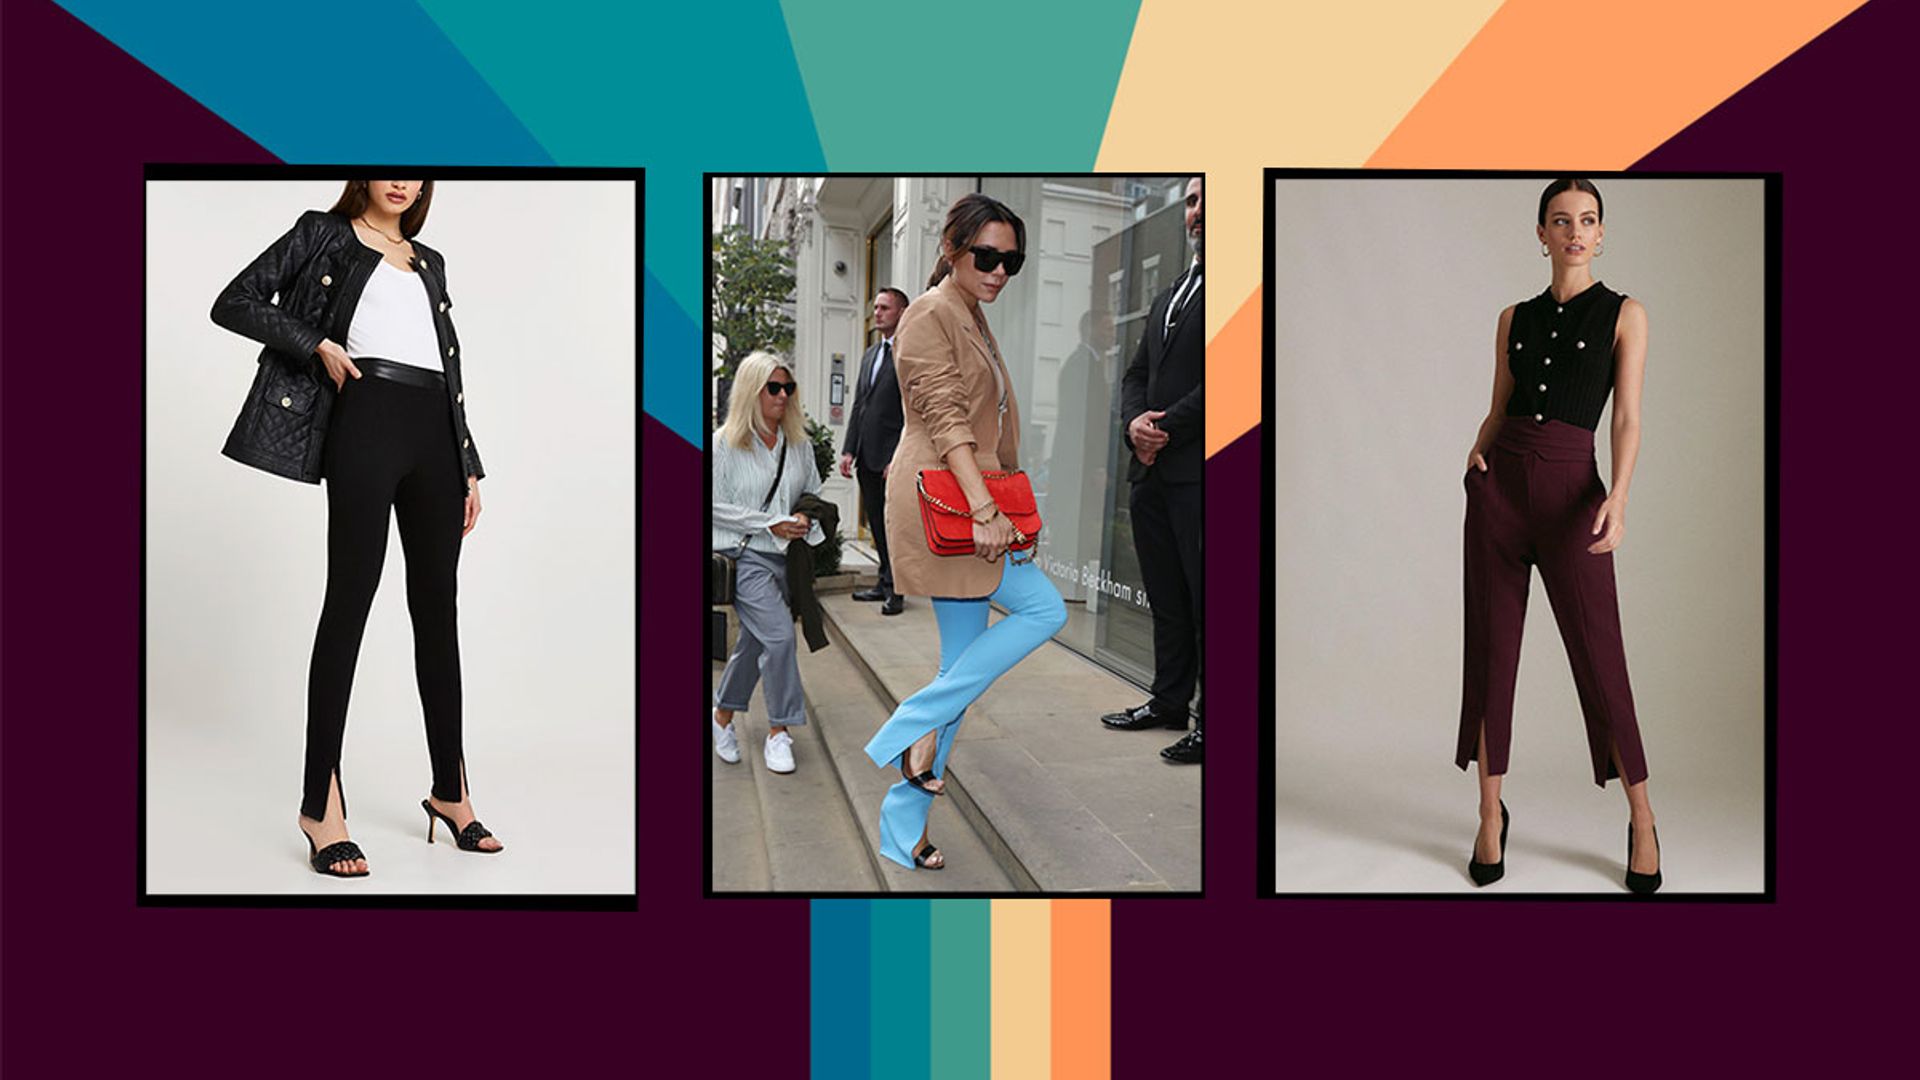 Stylish split-front trousers are trending for autumn - it's the Victoria  Beckham-approved trend to wear now